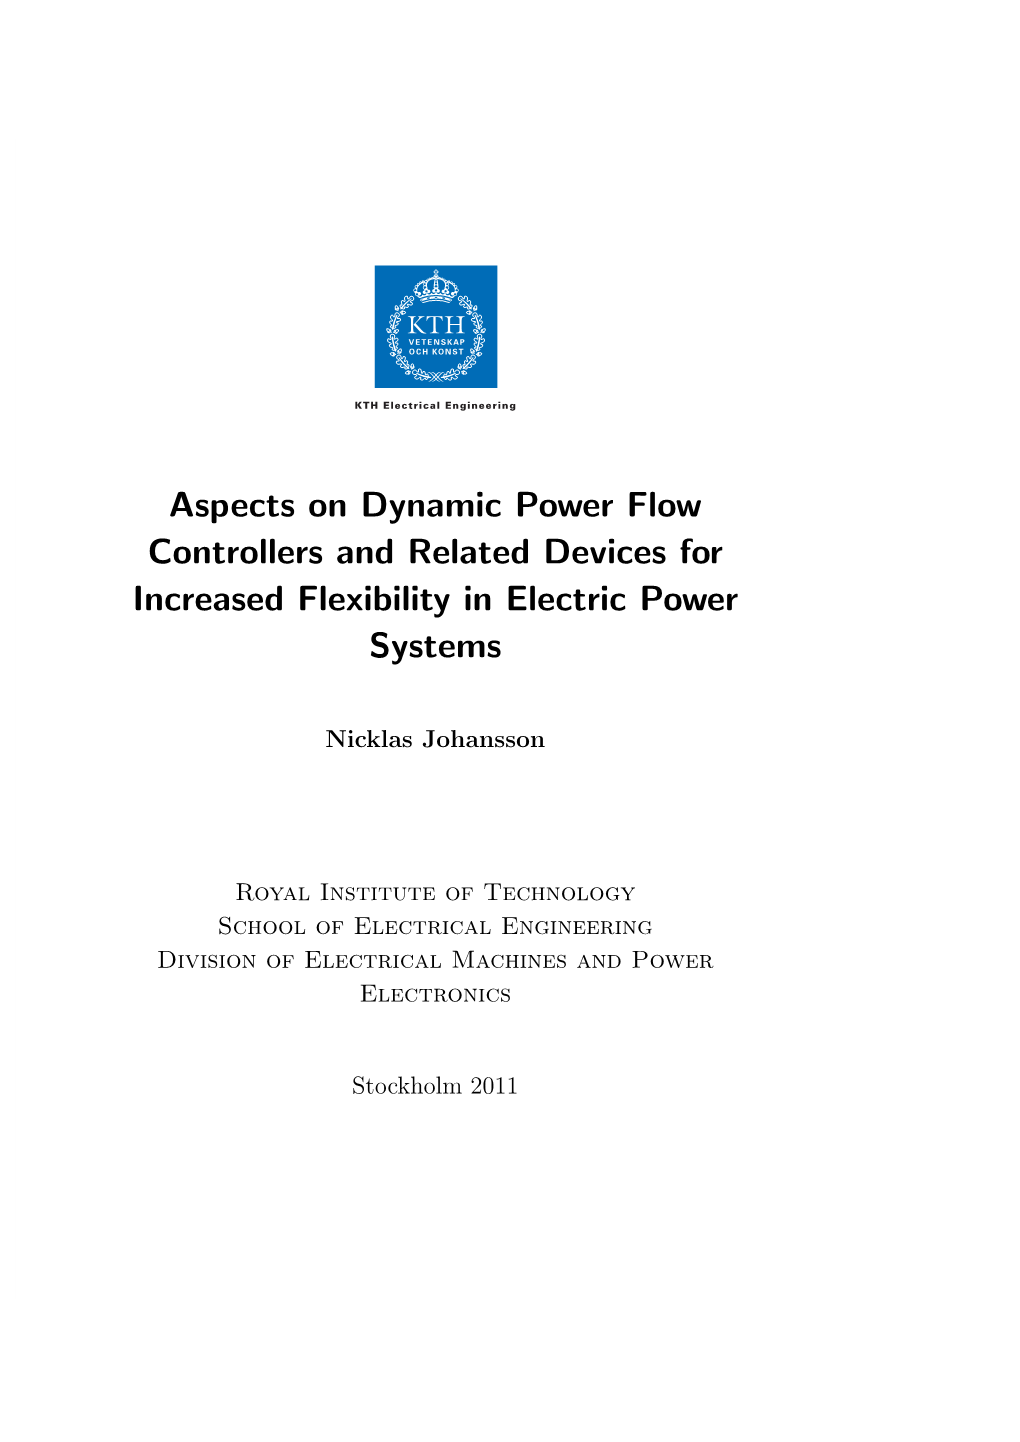 Aspects on Dynamic Power Flow Controllers and Related Devices for Increased Flexibility in Electric Power Systems